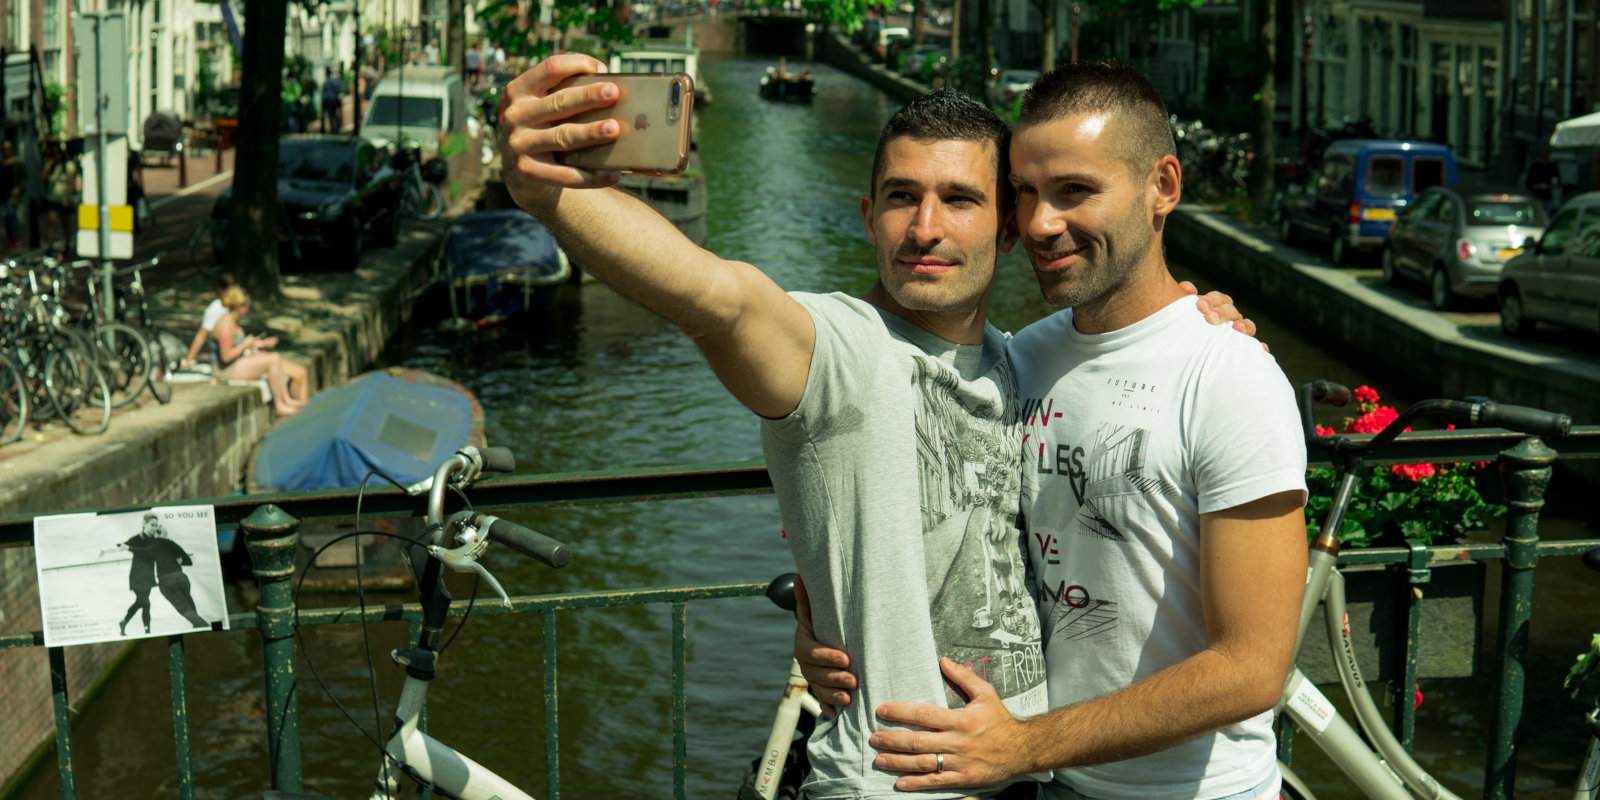 Staying in a gay hostel is a great way to save money and make new gay friends when travelling through Europe.